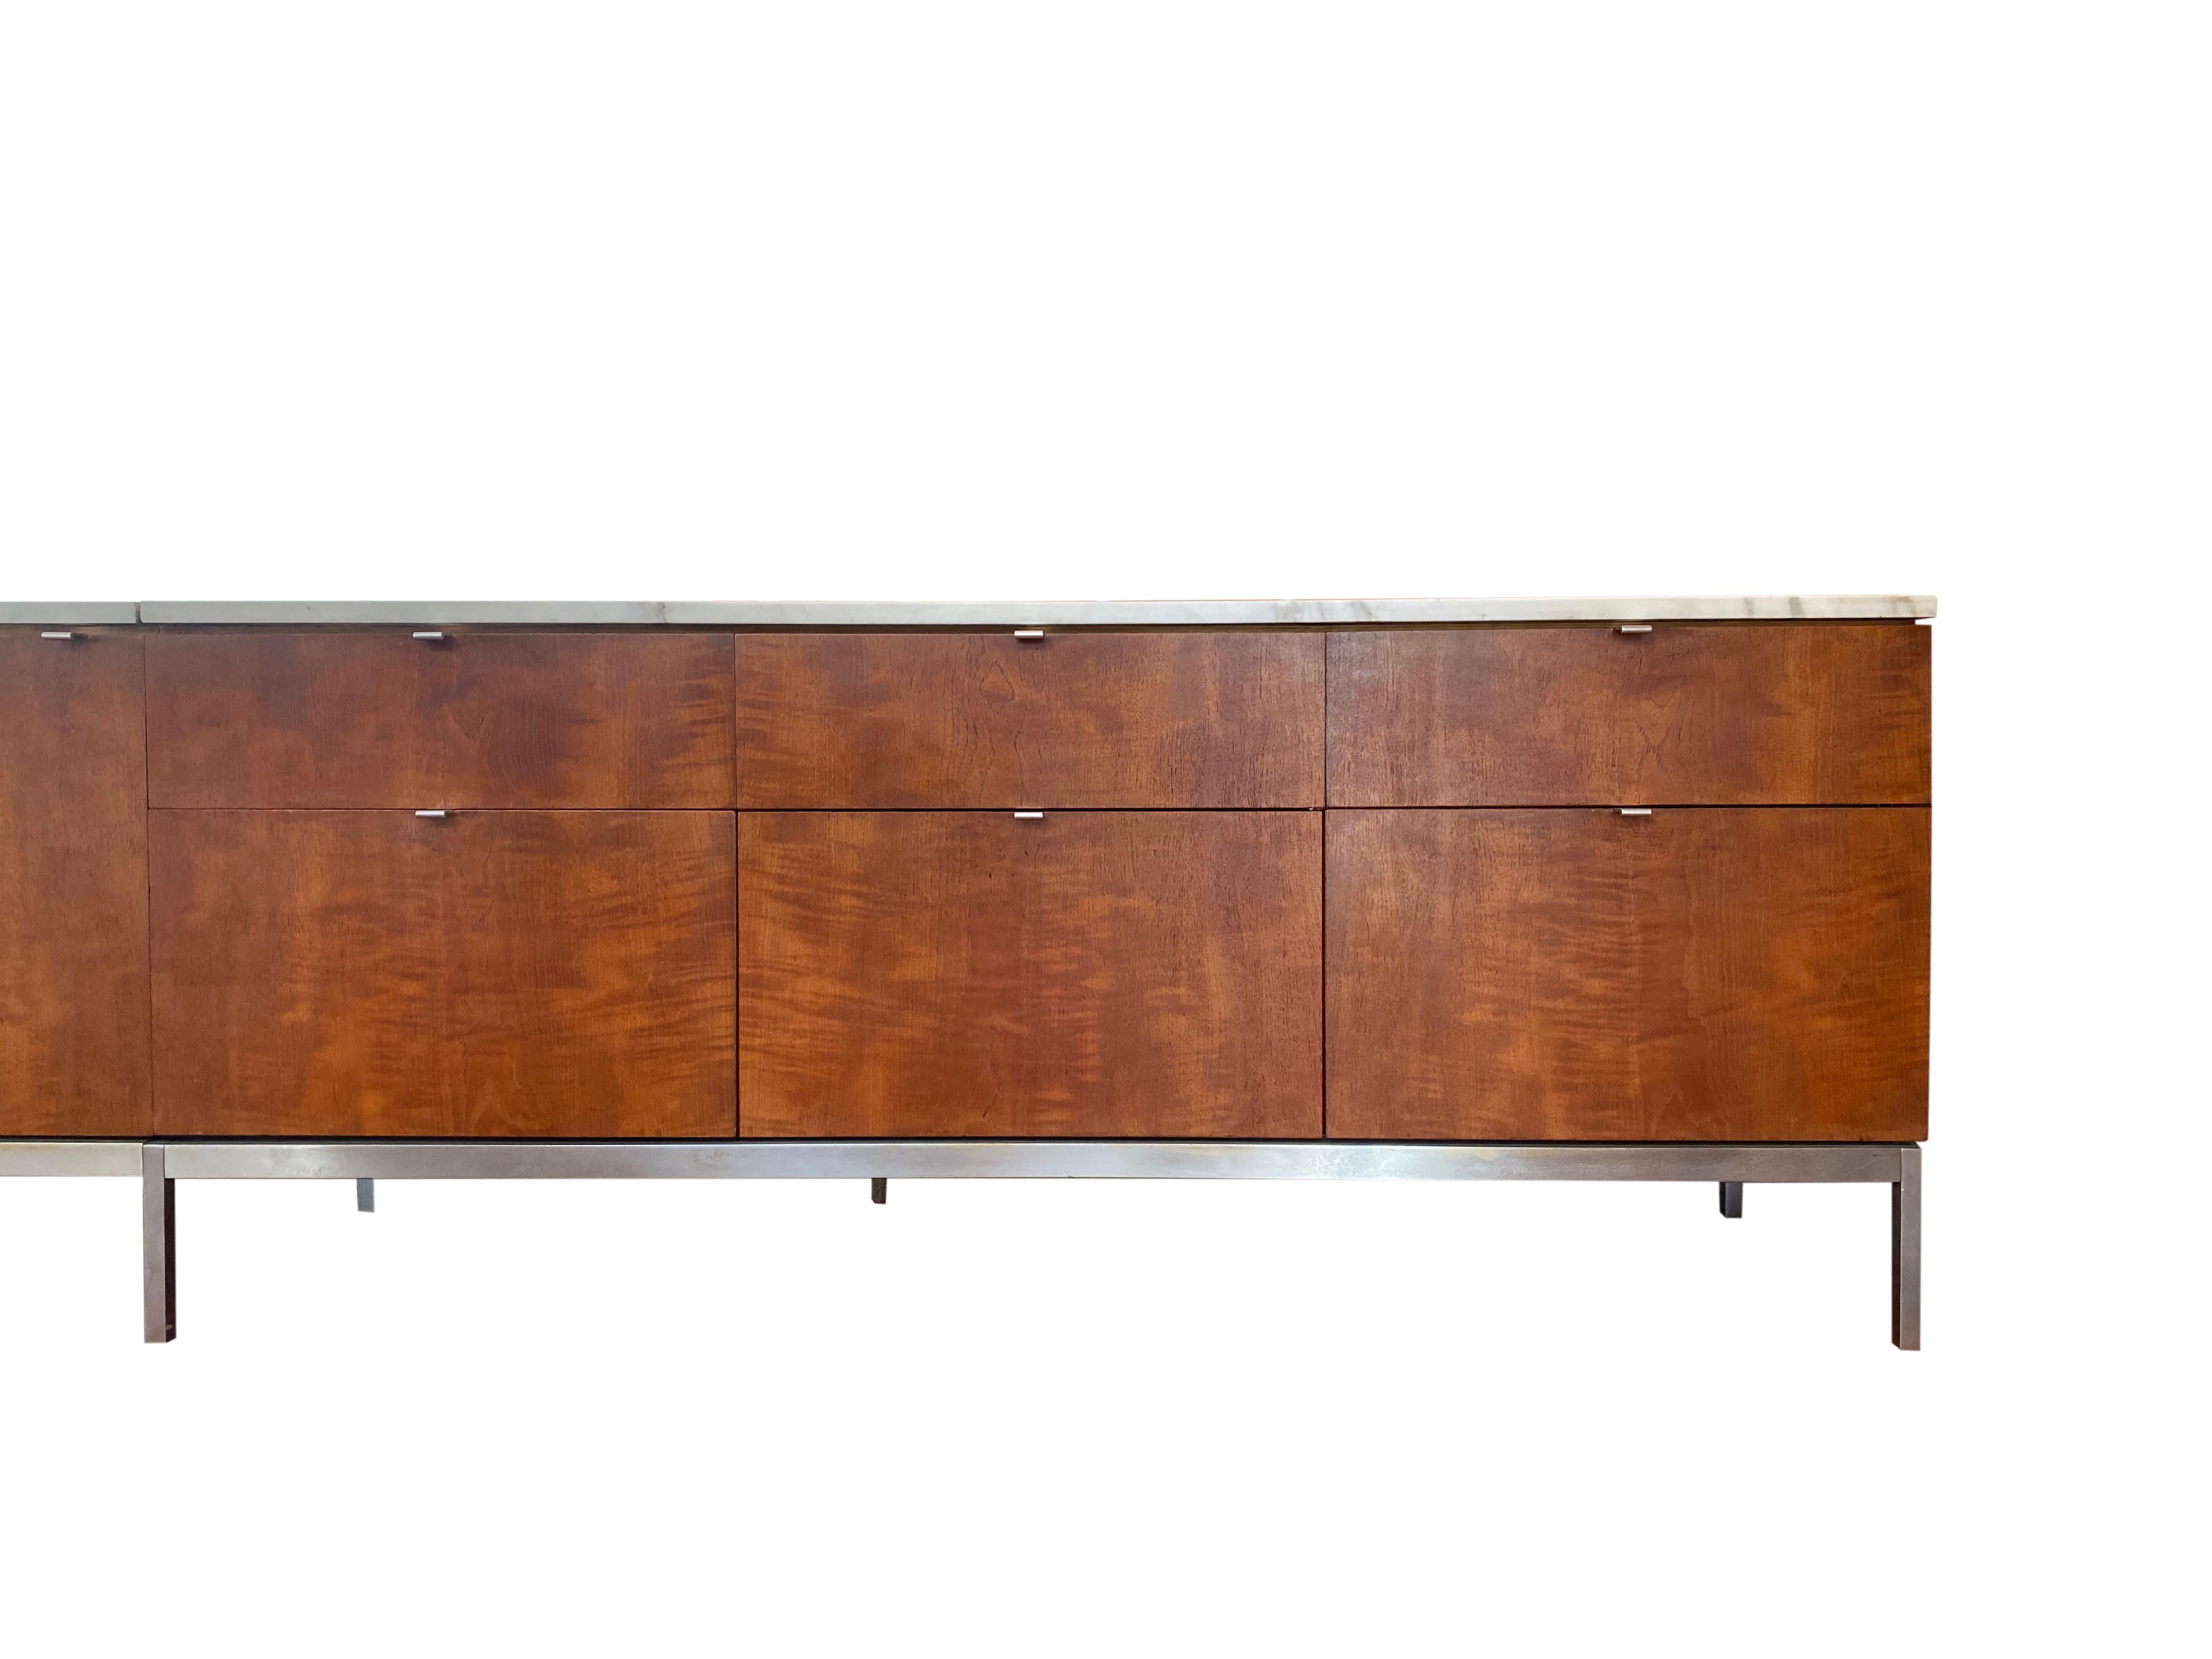 Florence Knoll credenza in walnut with a calacatta marble top and chrome metal frame. Optional central locking system. When Florence Knoll revolutionized private office design by replacing the typical executive desk with a table desk, she needed a